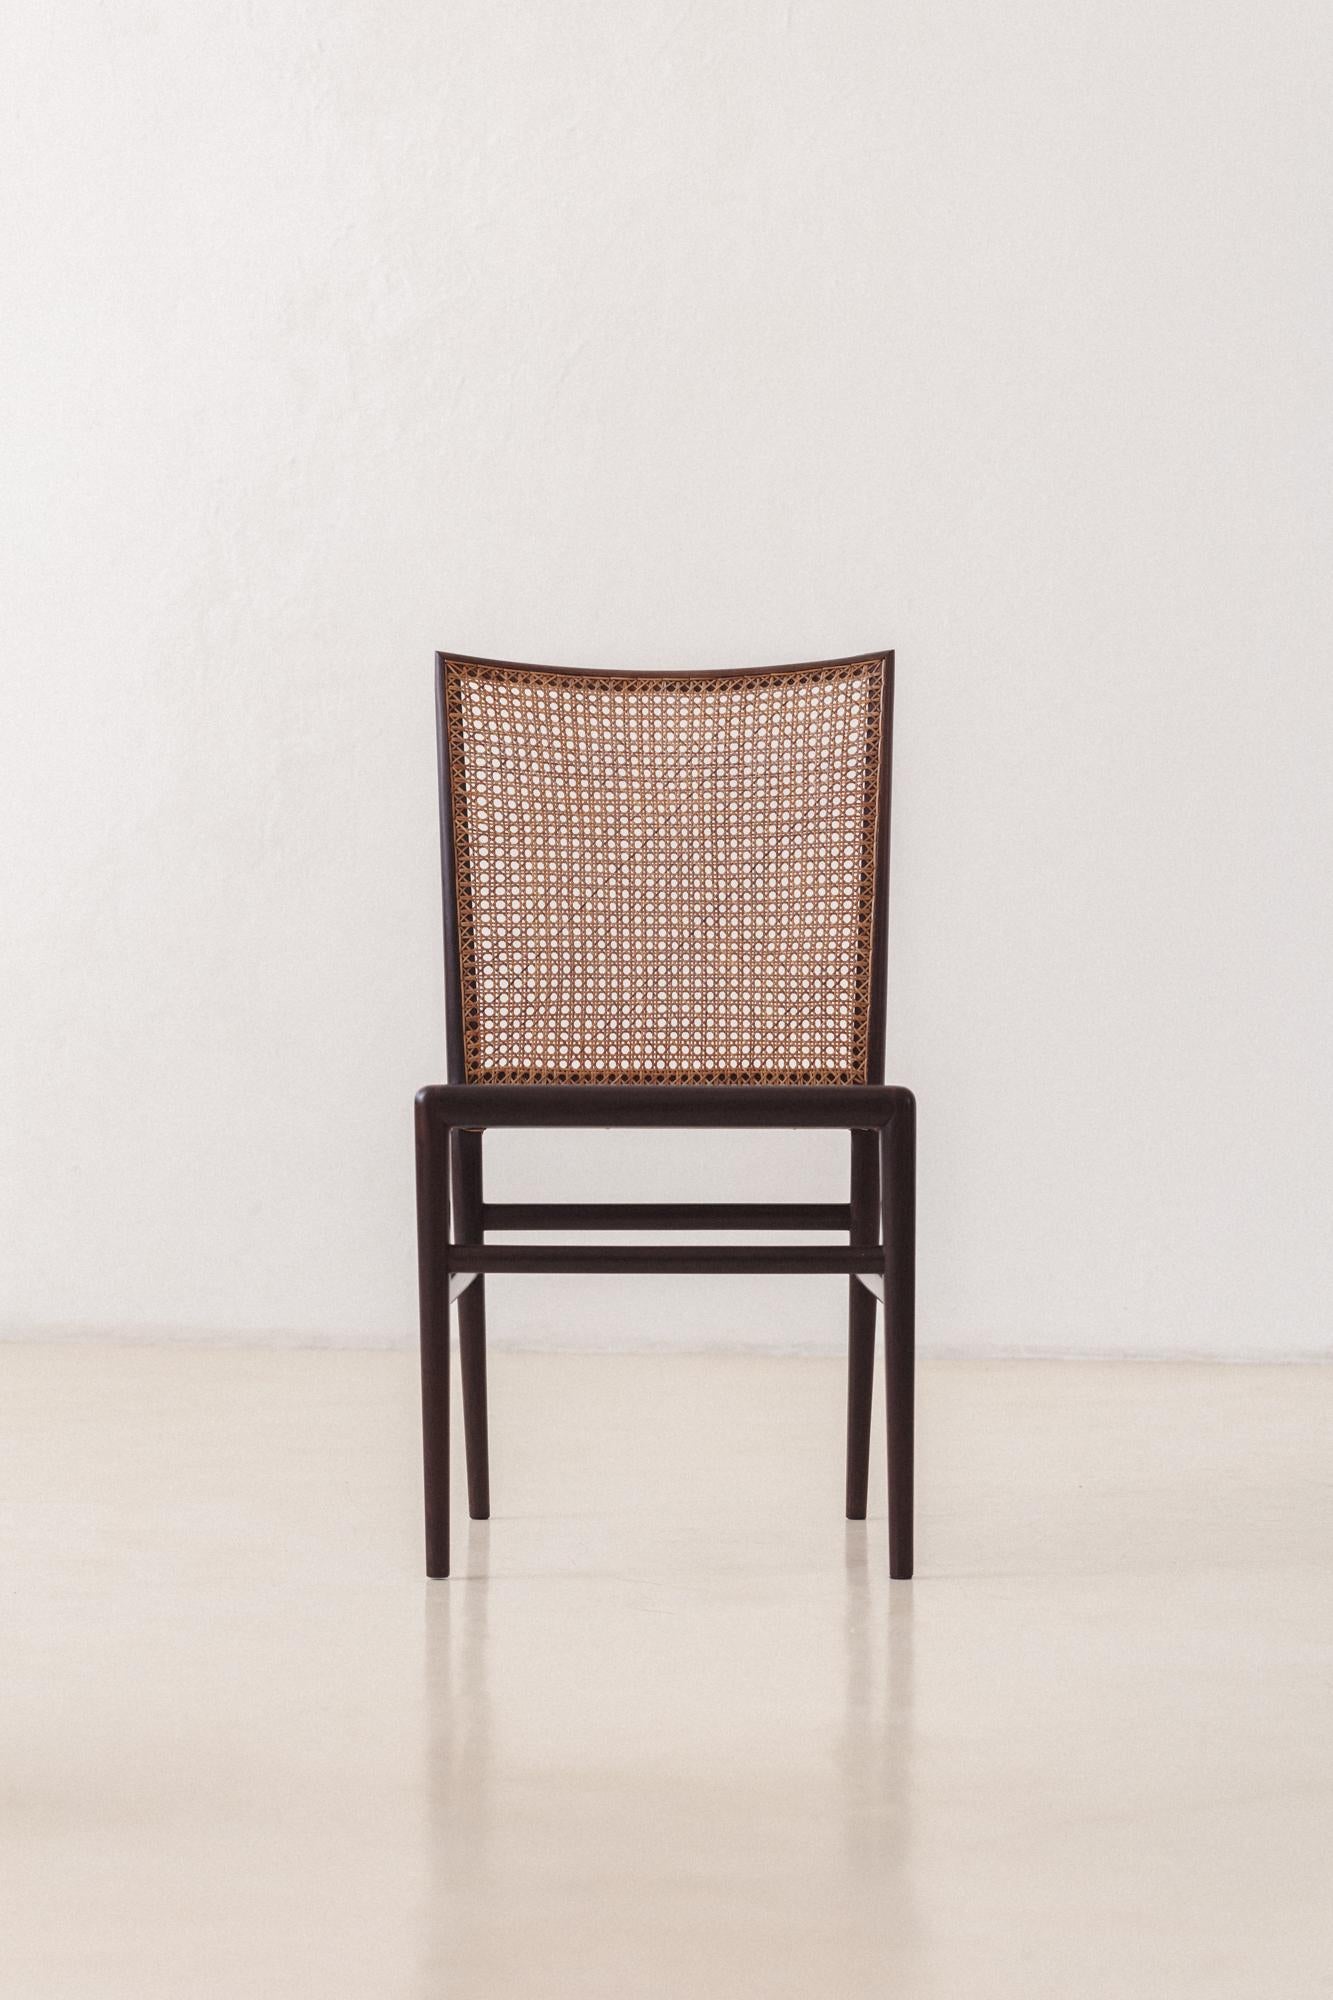 Set of 8 Rosewood Cane Chairs, Branco & Preto, 1952, Brazilian Midcentury For Sale 4